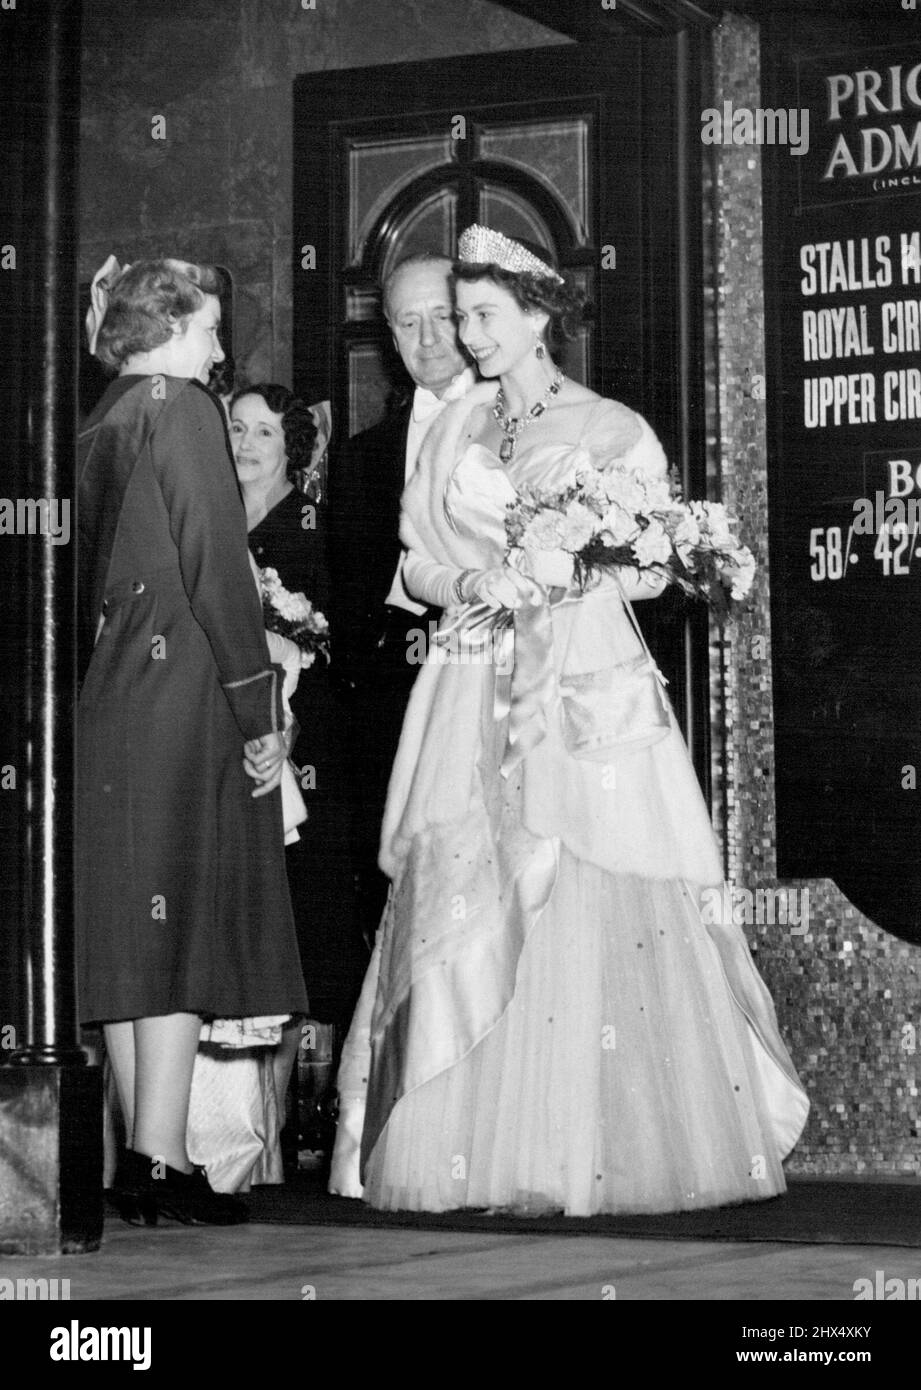 After the Royal Variety Performance last night the Queen carrying a bouquet, chatted happily with one of the attendant at the London Palladium. November 02, 1954. (Photo by Daily Mirror). Stock Photo